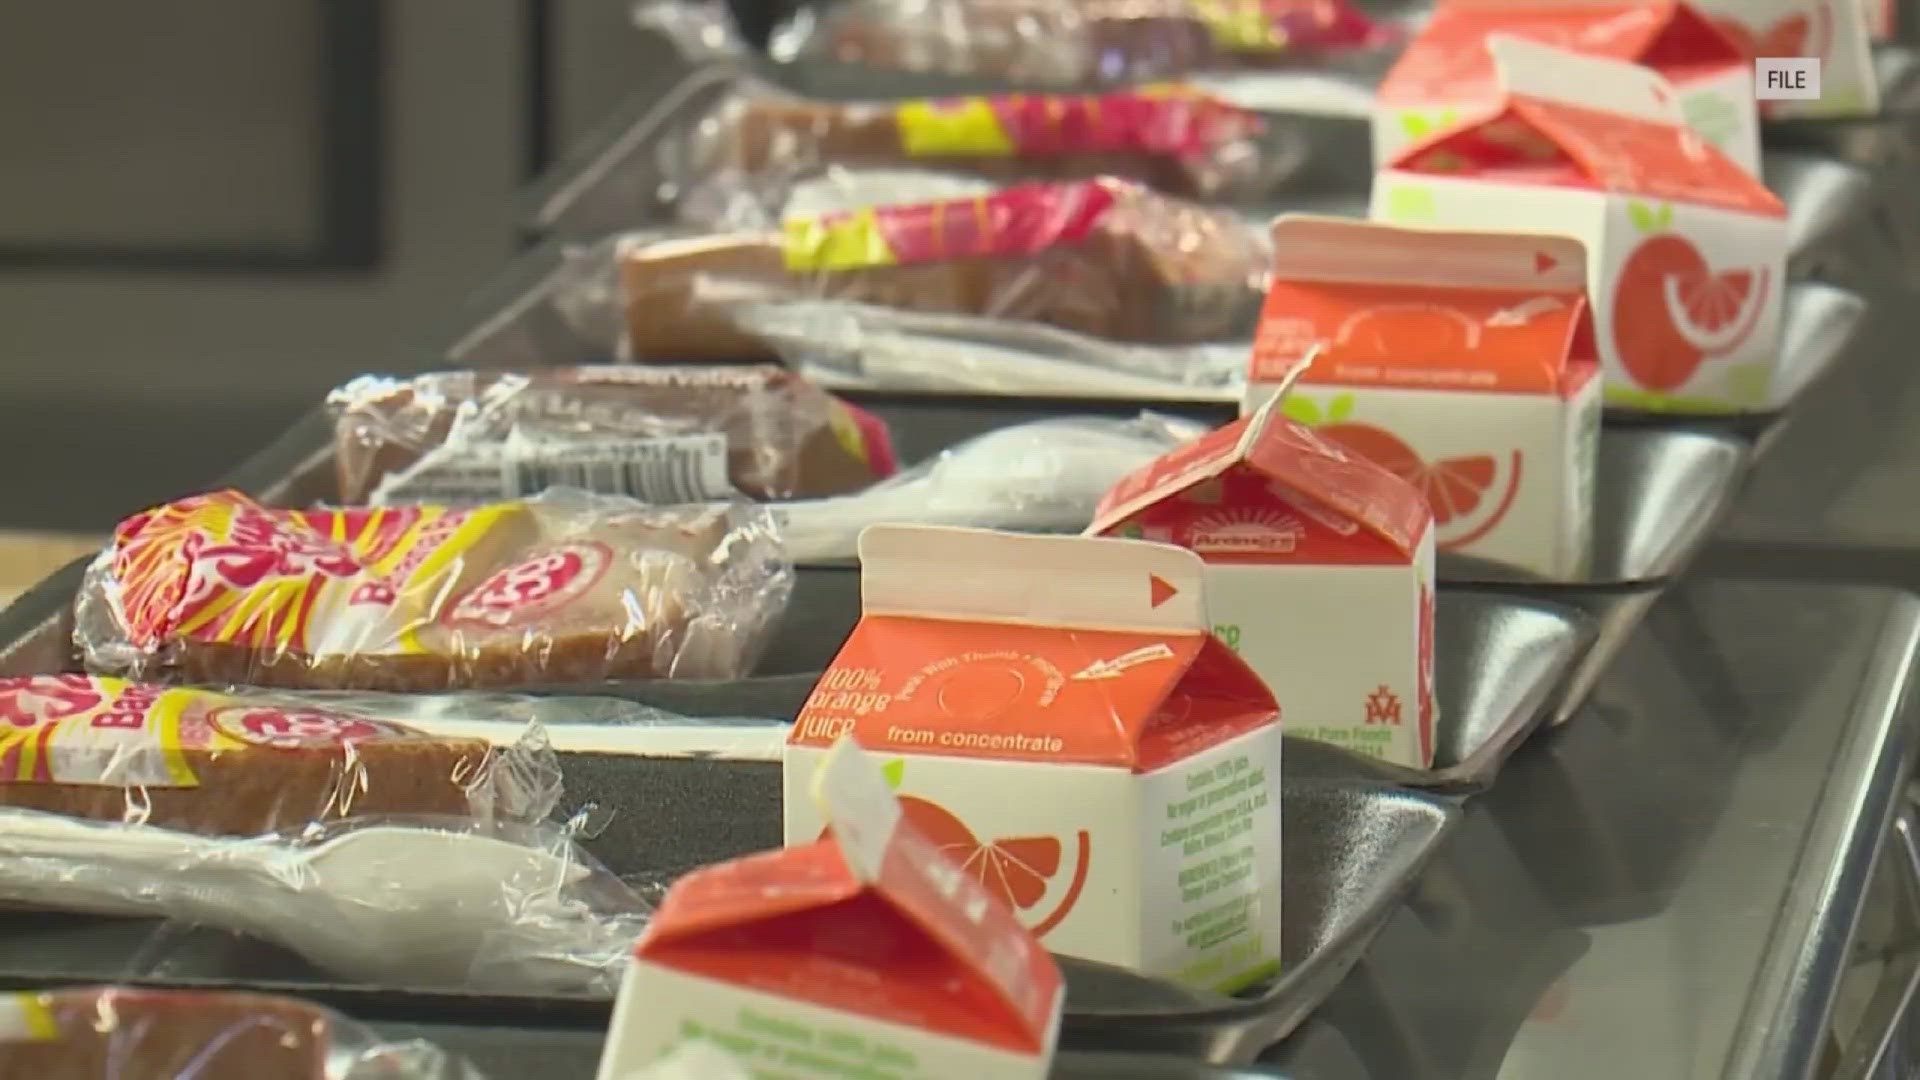 A new California program is allowing eligible families with children to have extra money for food this summer — and some don’t even need to apply for the funds.